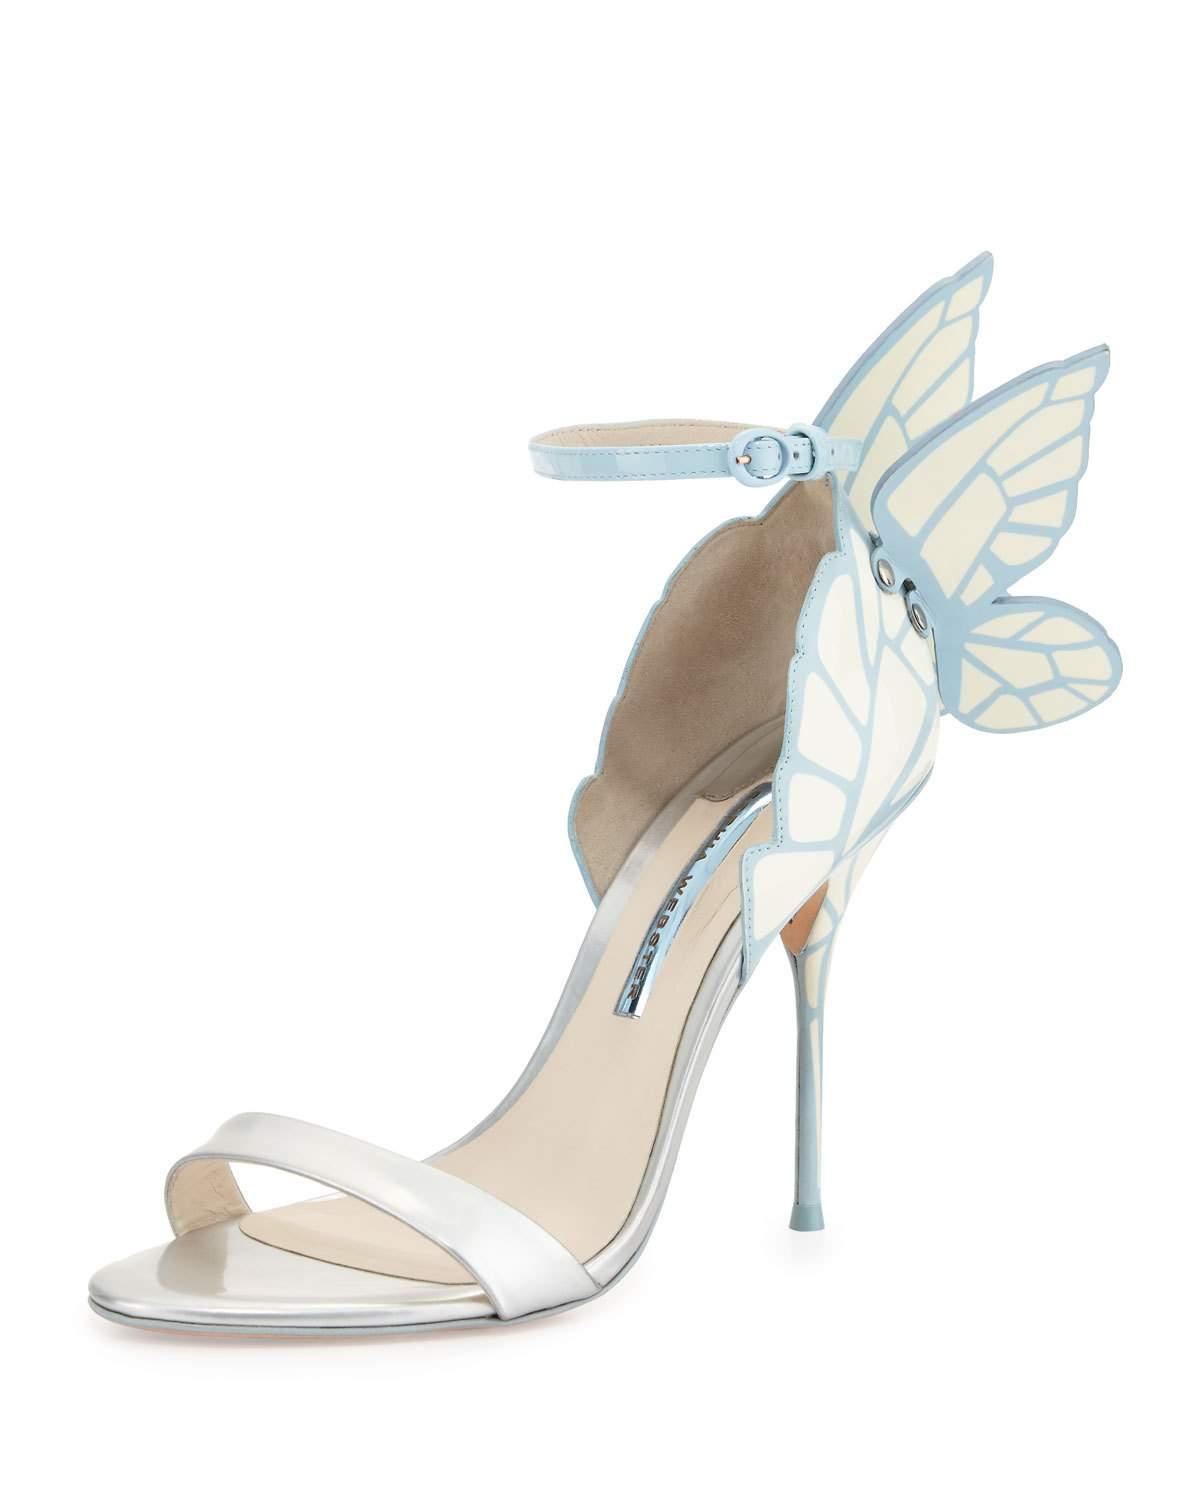 60 White Bridal Shoes That are Anything But Boring